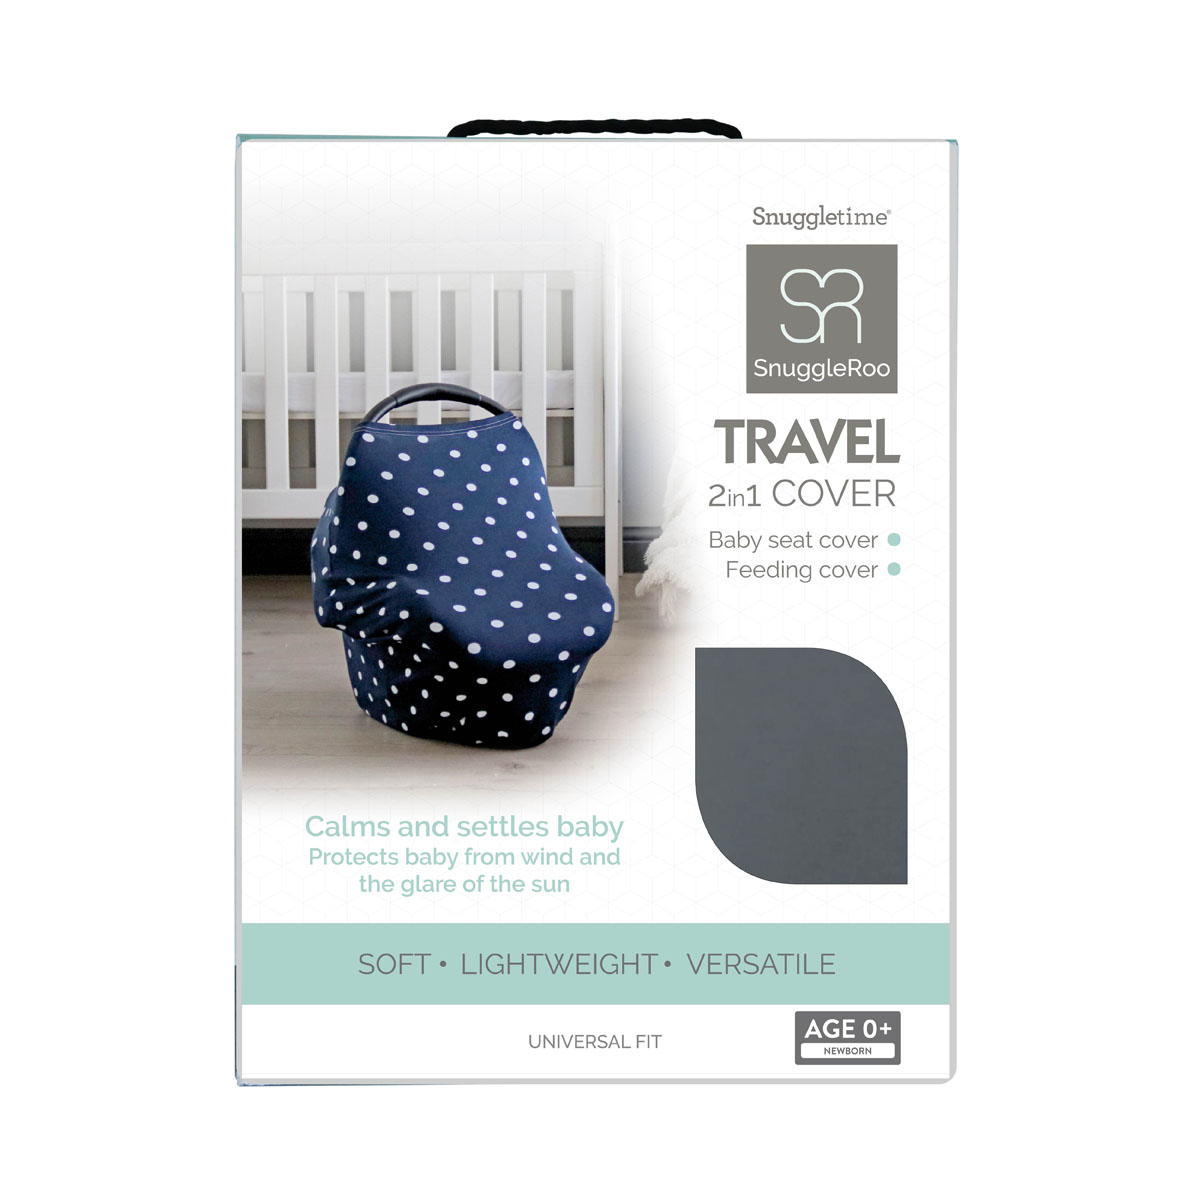 Snuggleroo Travel 2-in-1 Cover -Charcoal - 323862